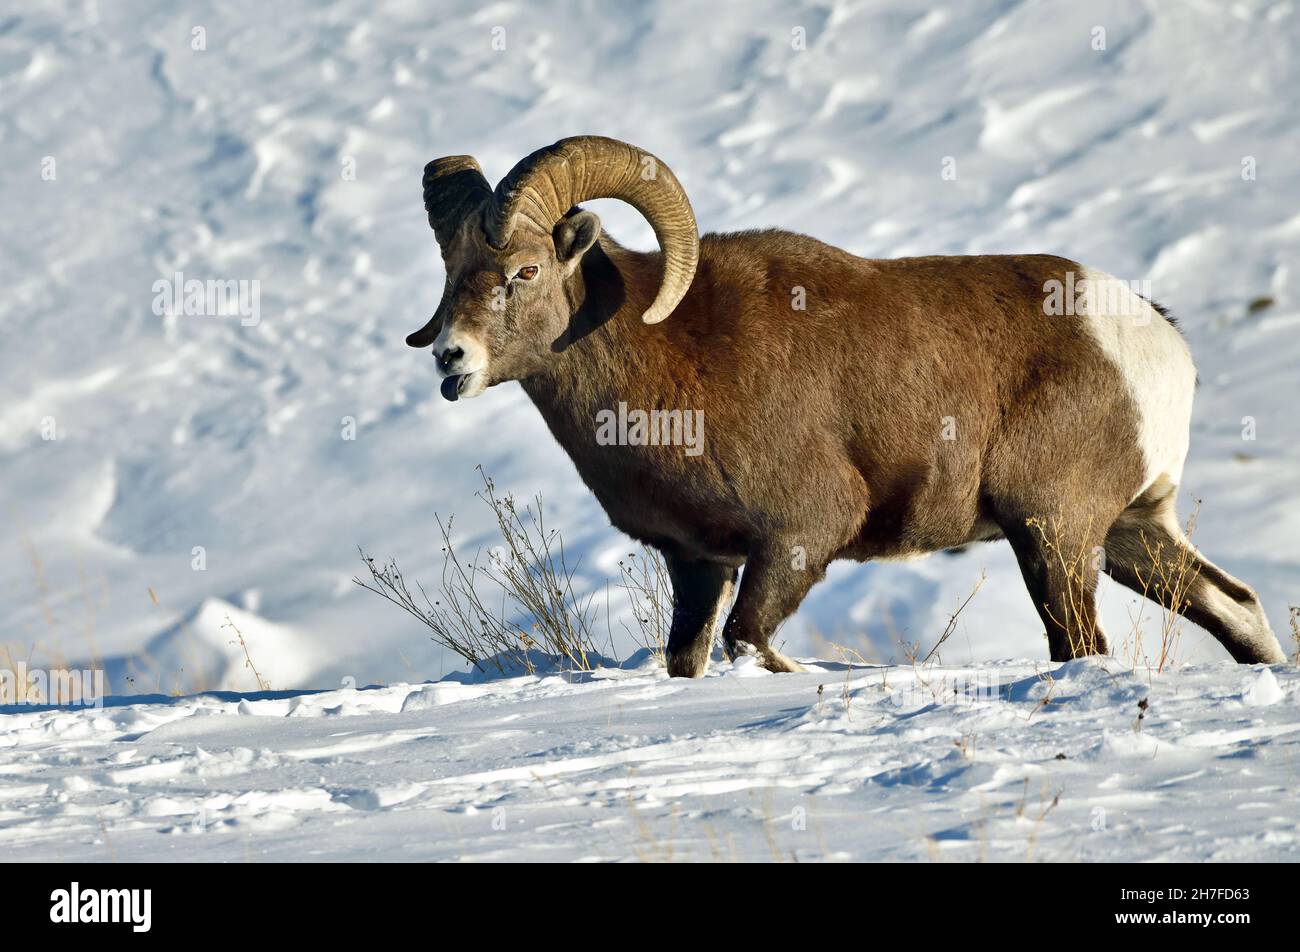 A wild rocky mountain Bighorn Sheep 'Orvis canadensis', walking through the fresh snow sticking out his black tongue in rural Alberta Canada Stock Photo